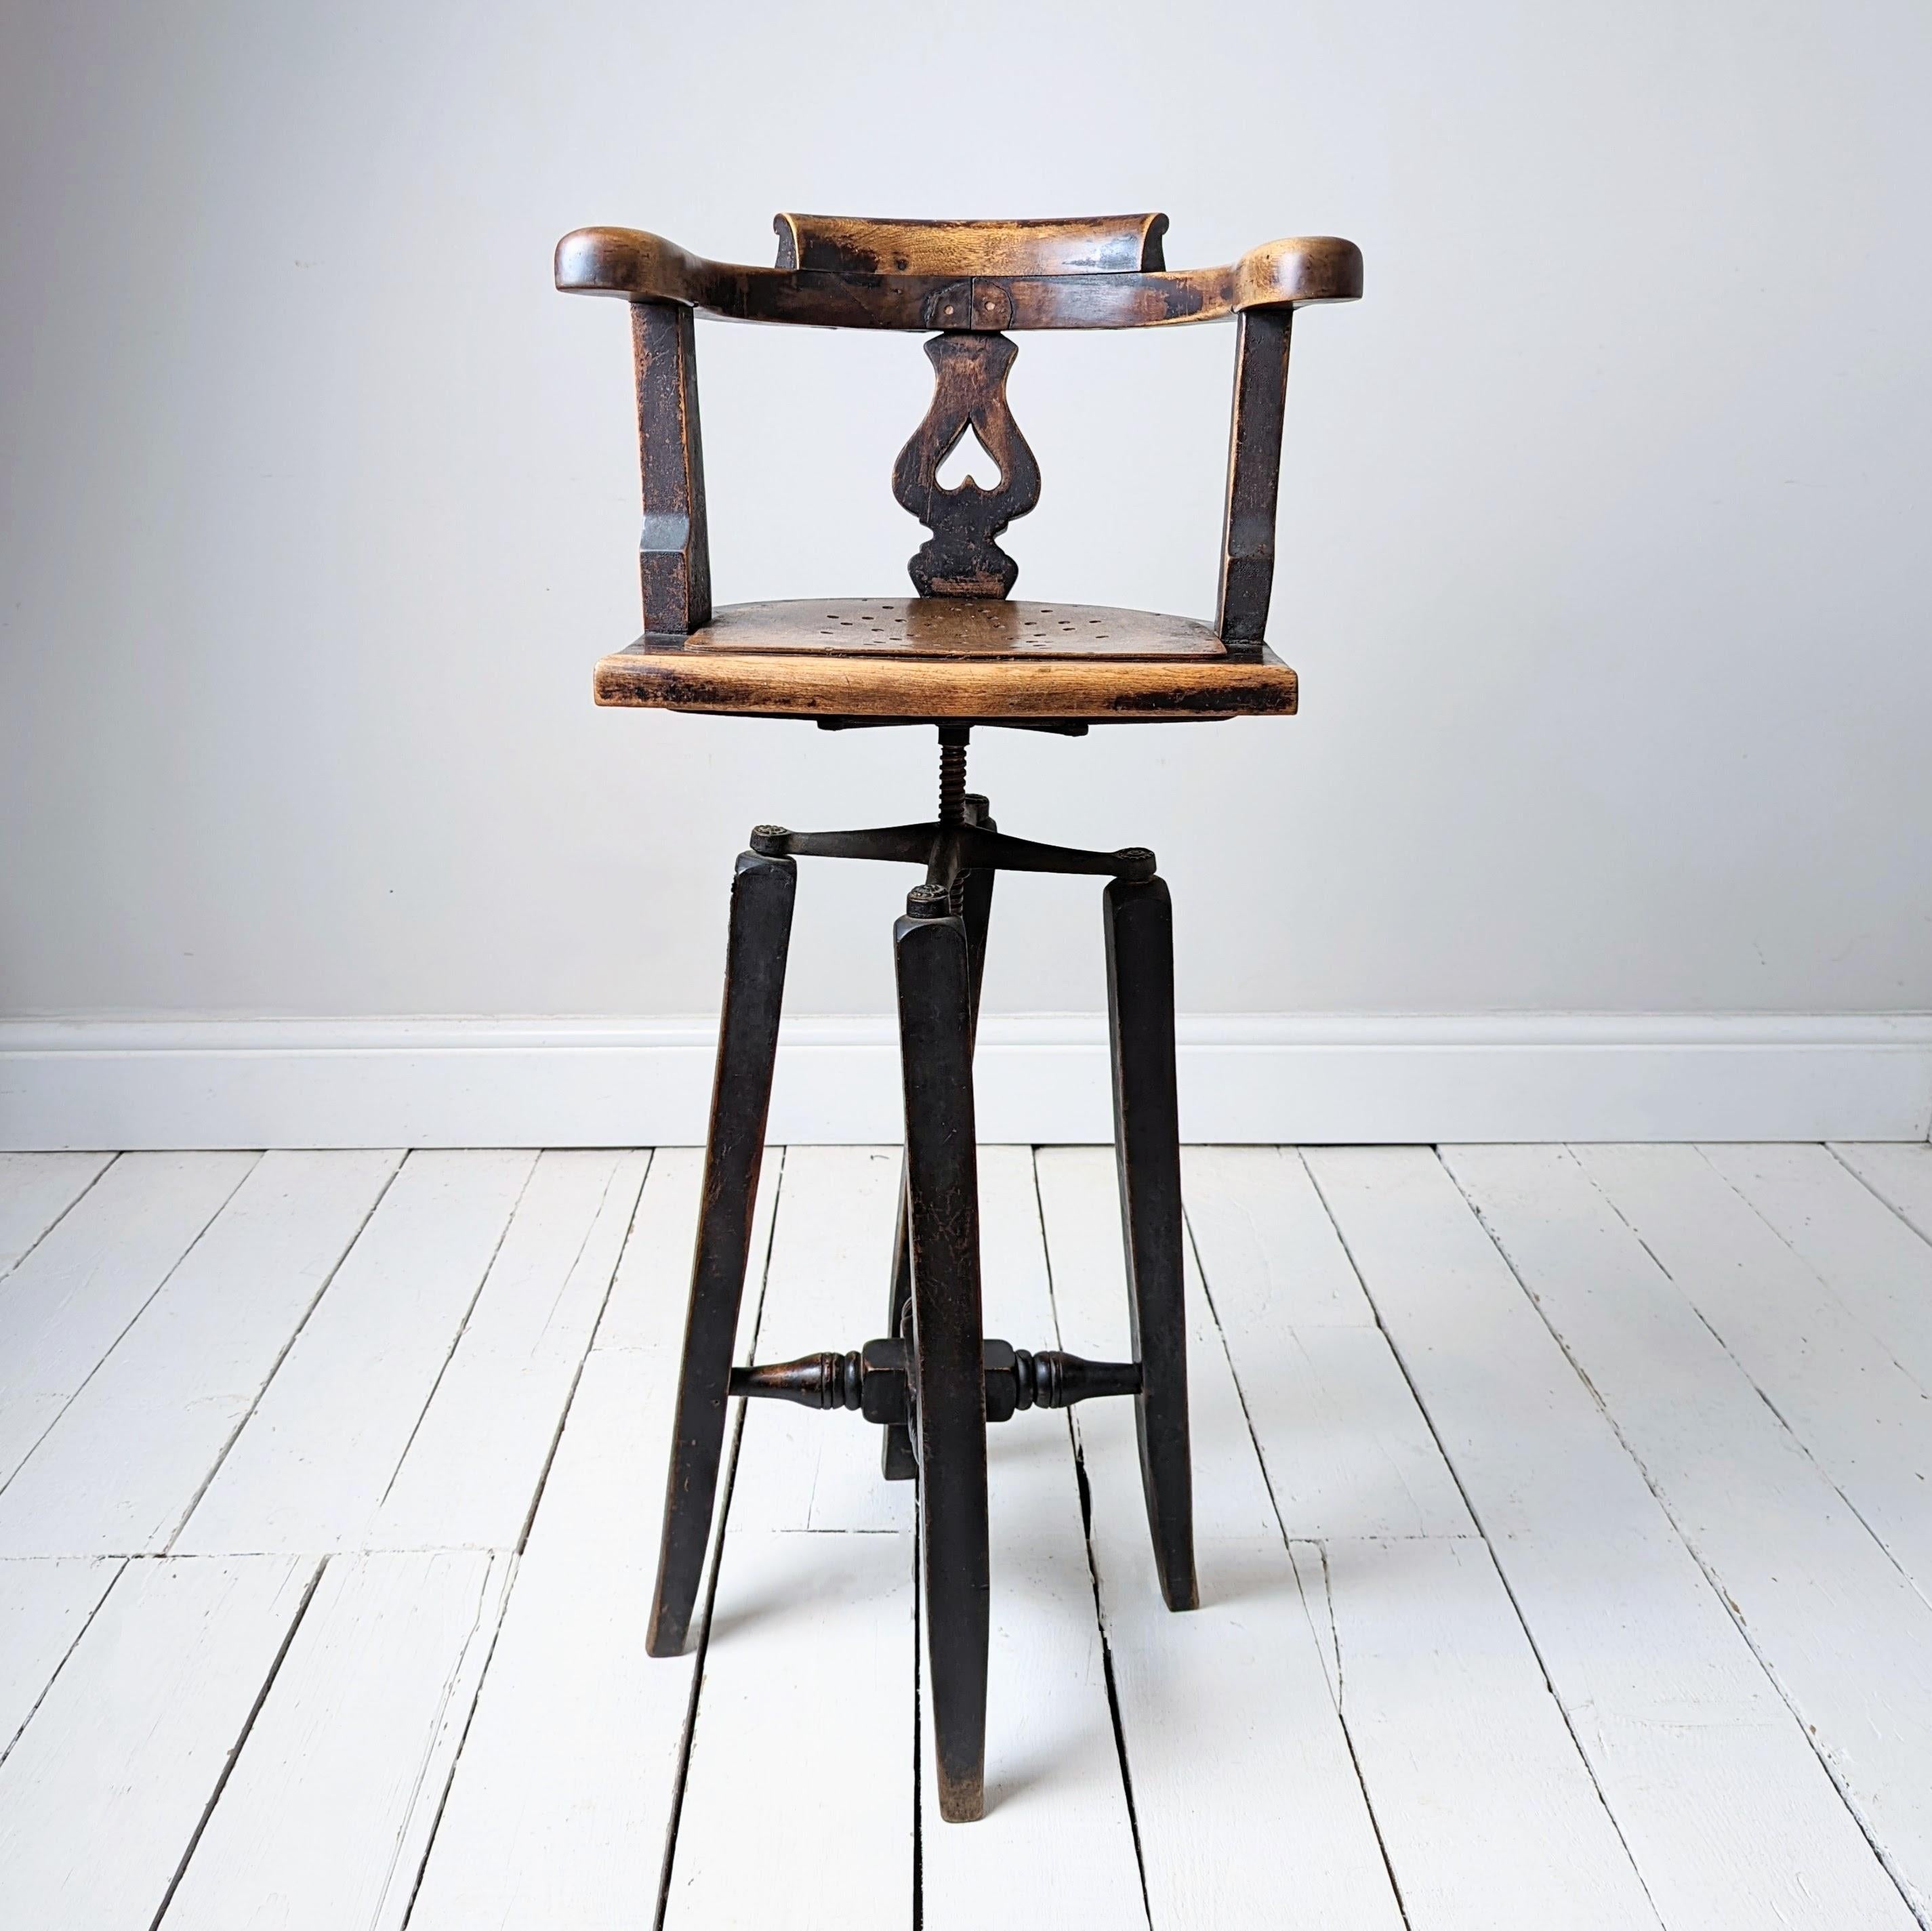  19th Century English Vernacular Childs Barbers Chair In Good Condition For Sale In Leamington Spa, GB